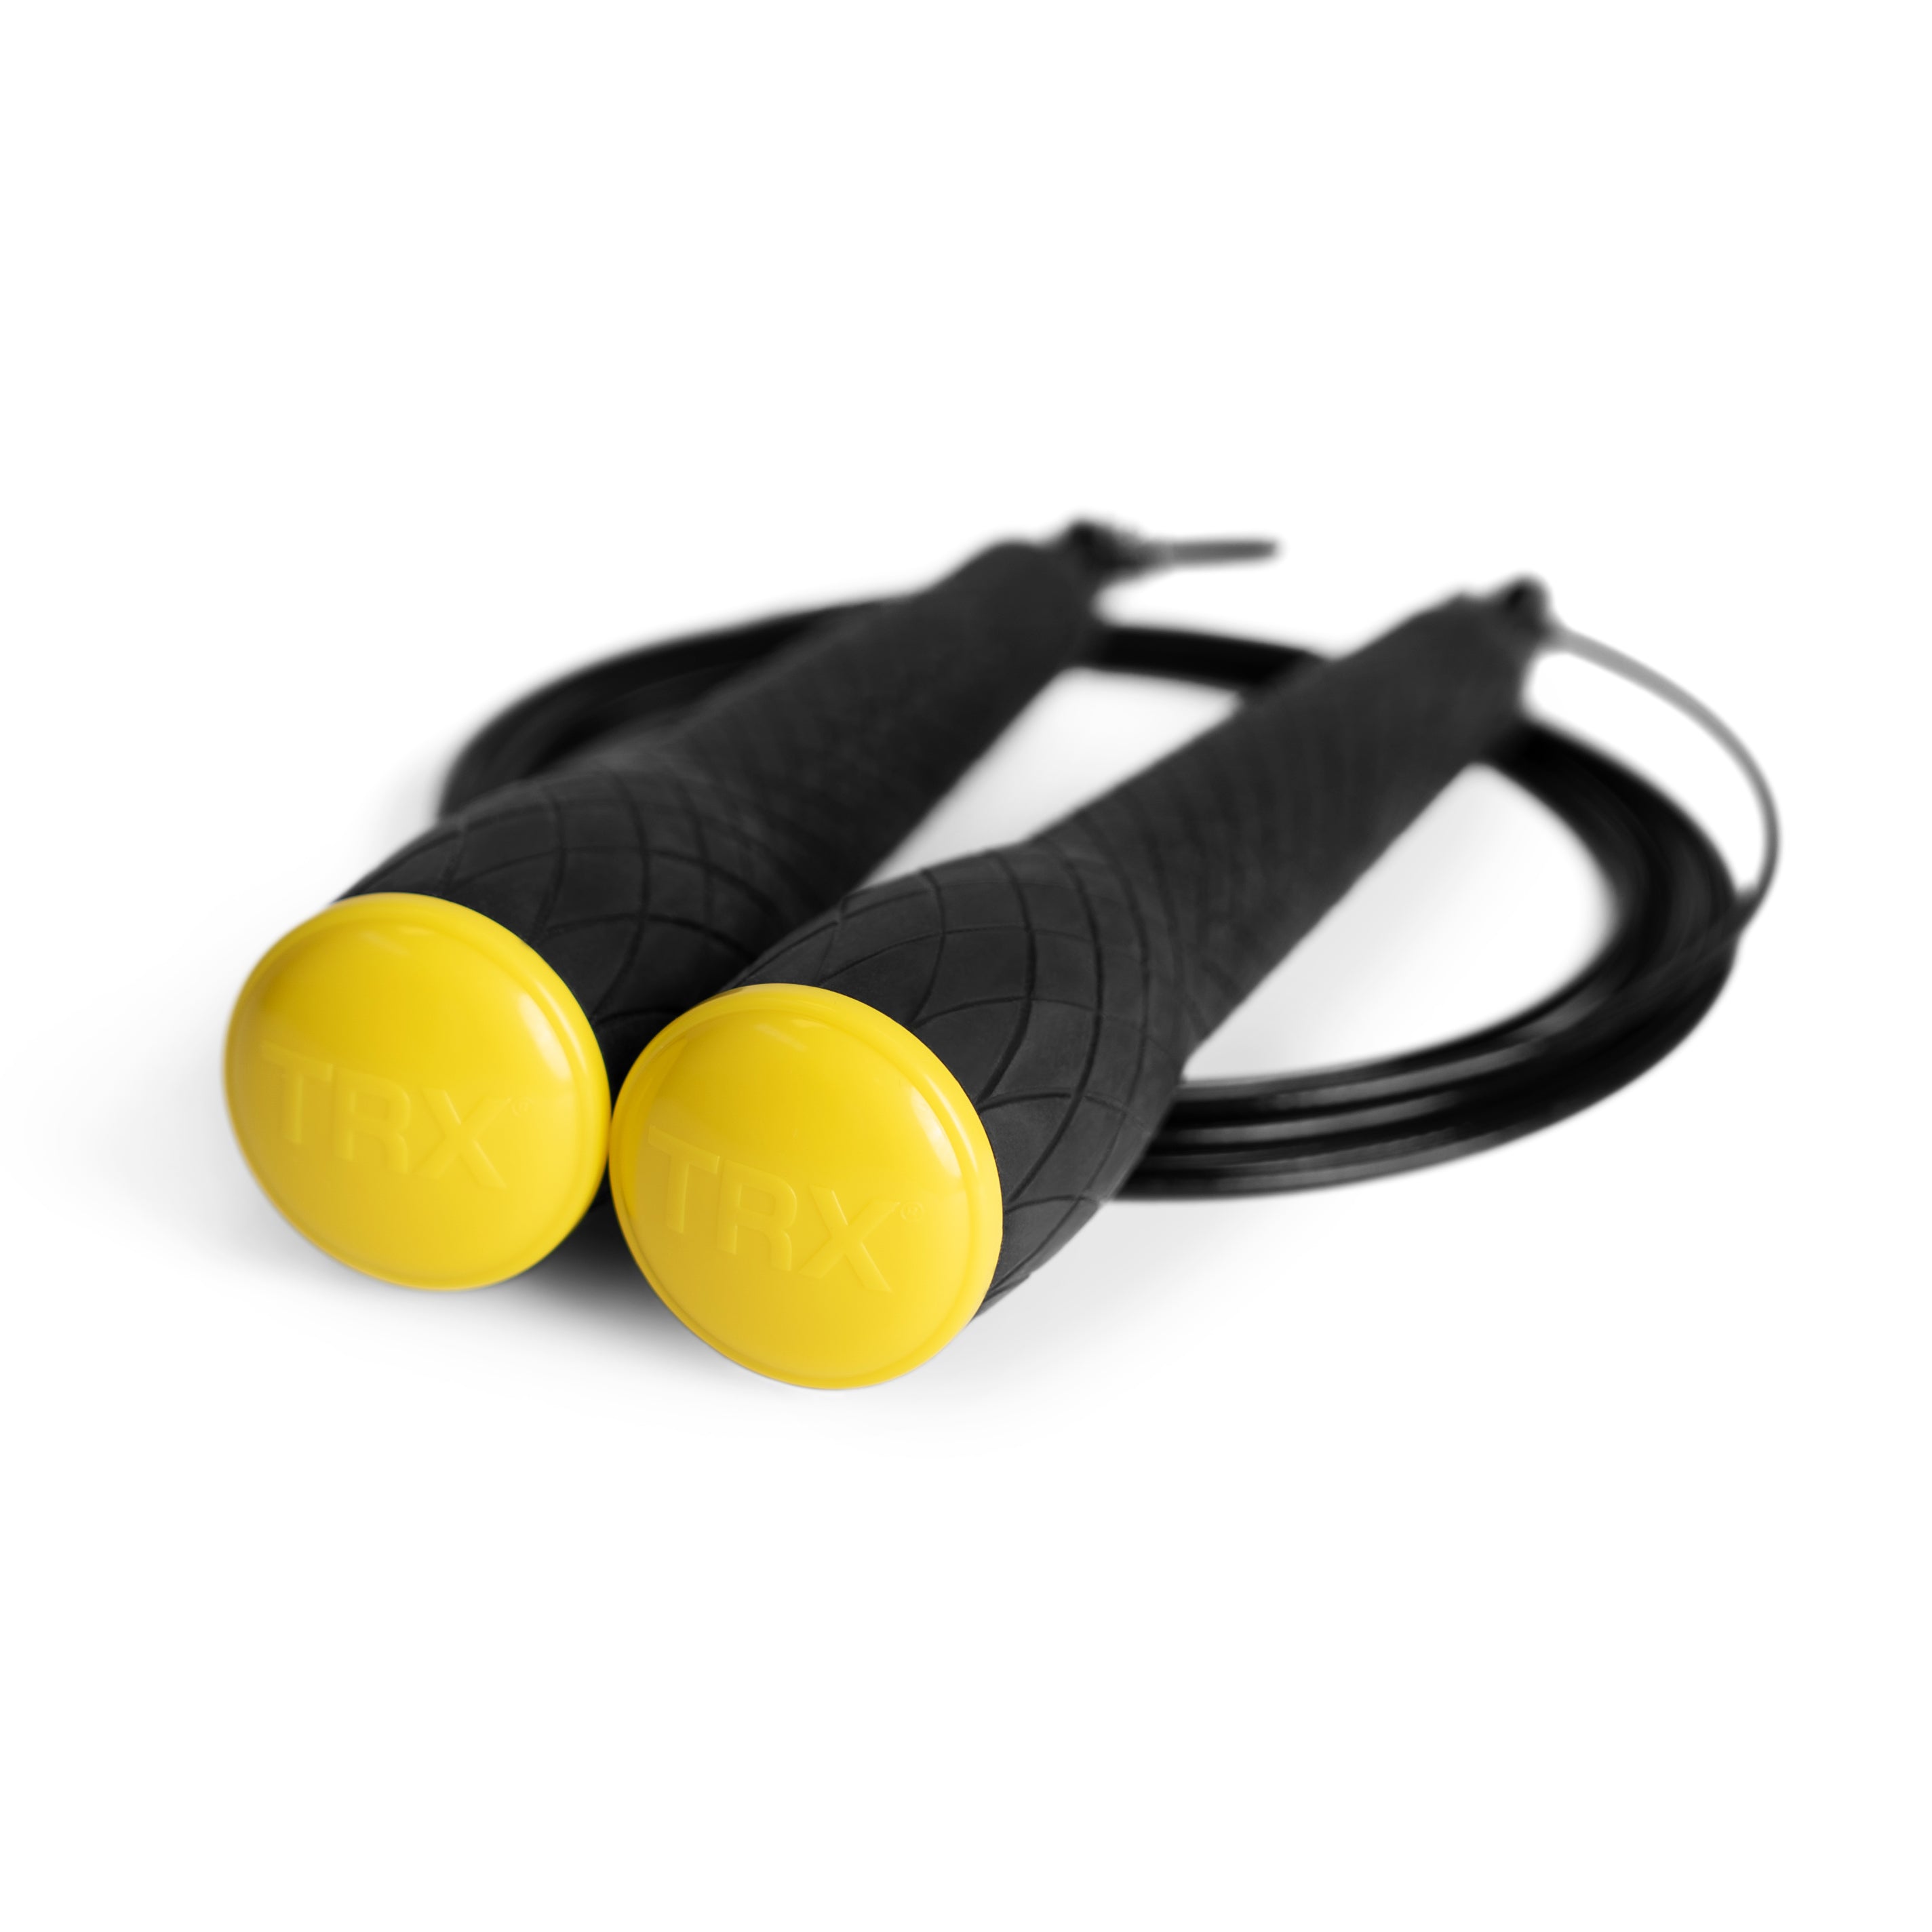 New Gear Drop: 2 New TRX® Jump Ropes and Why You Need Them For Full-Bo